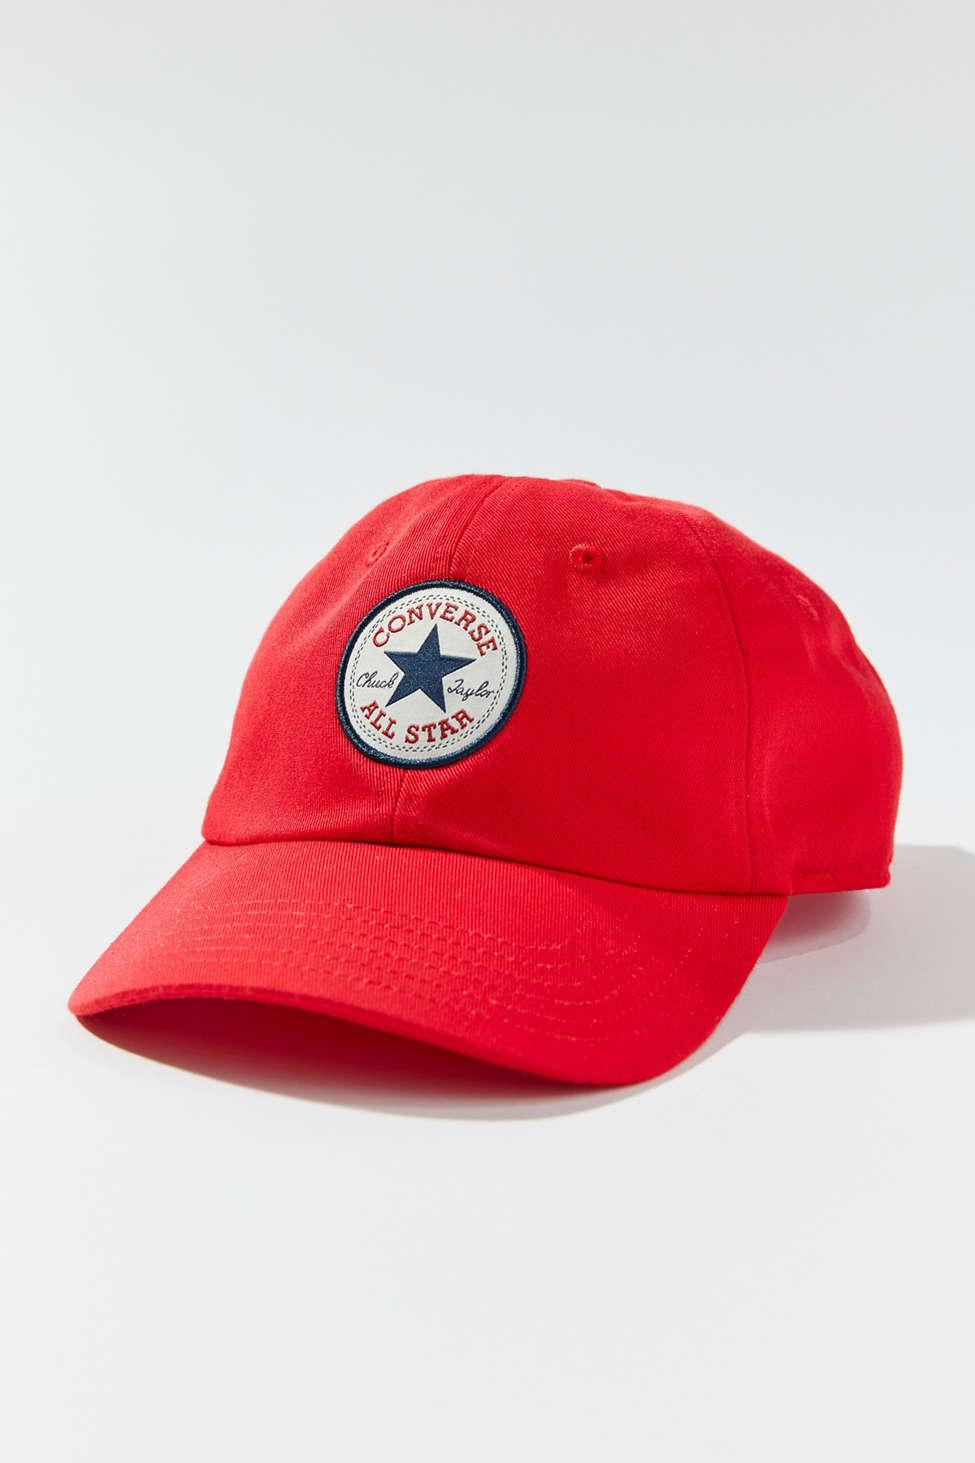 Converse Chuck Taylor All Star Patch Baseball Hat in Red | Lyst